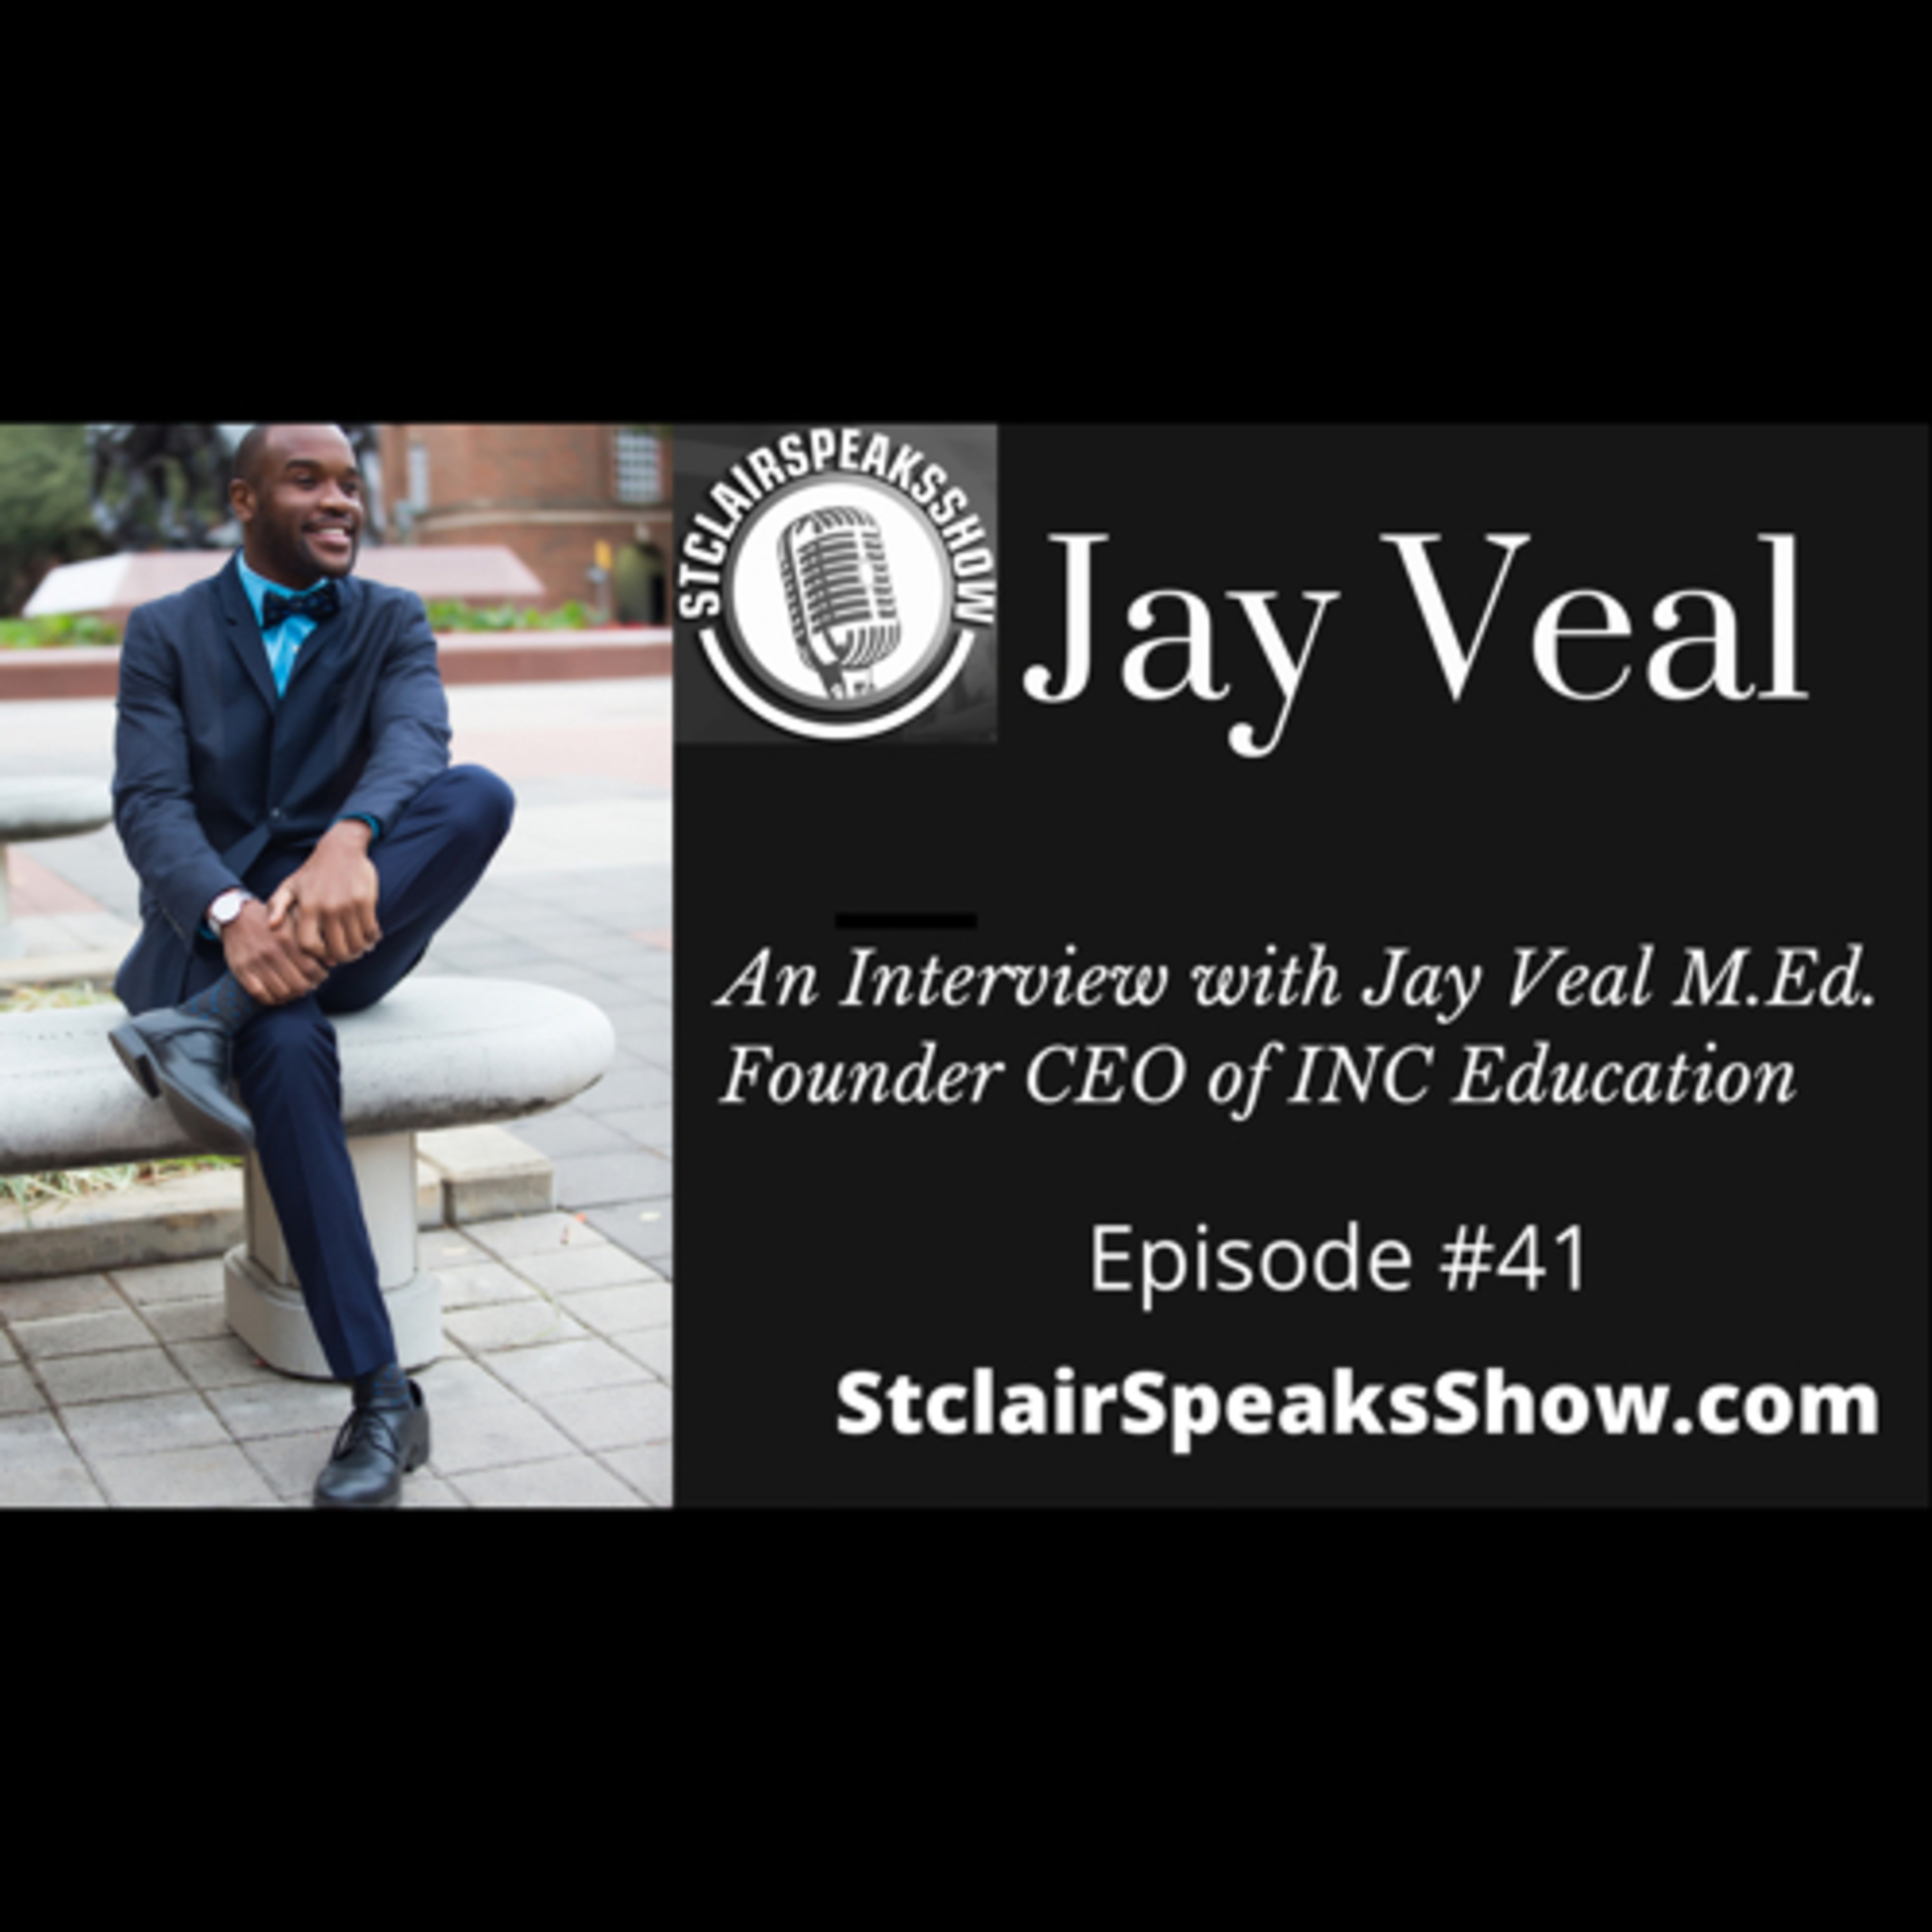 The StclairSpeaksshow Podcast Featuring Jay Veal M.Ed. Founder / CEO, INC Education Episode #41 Image